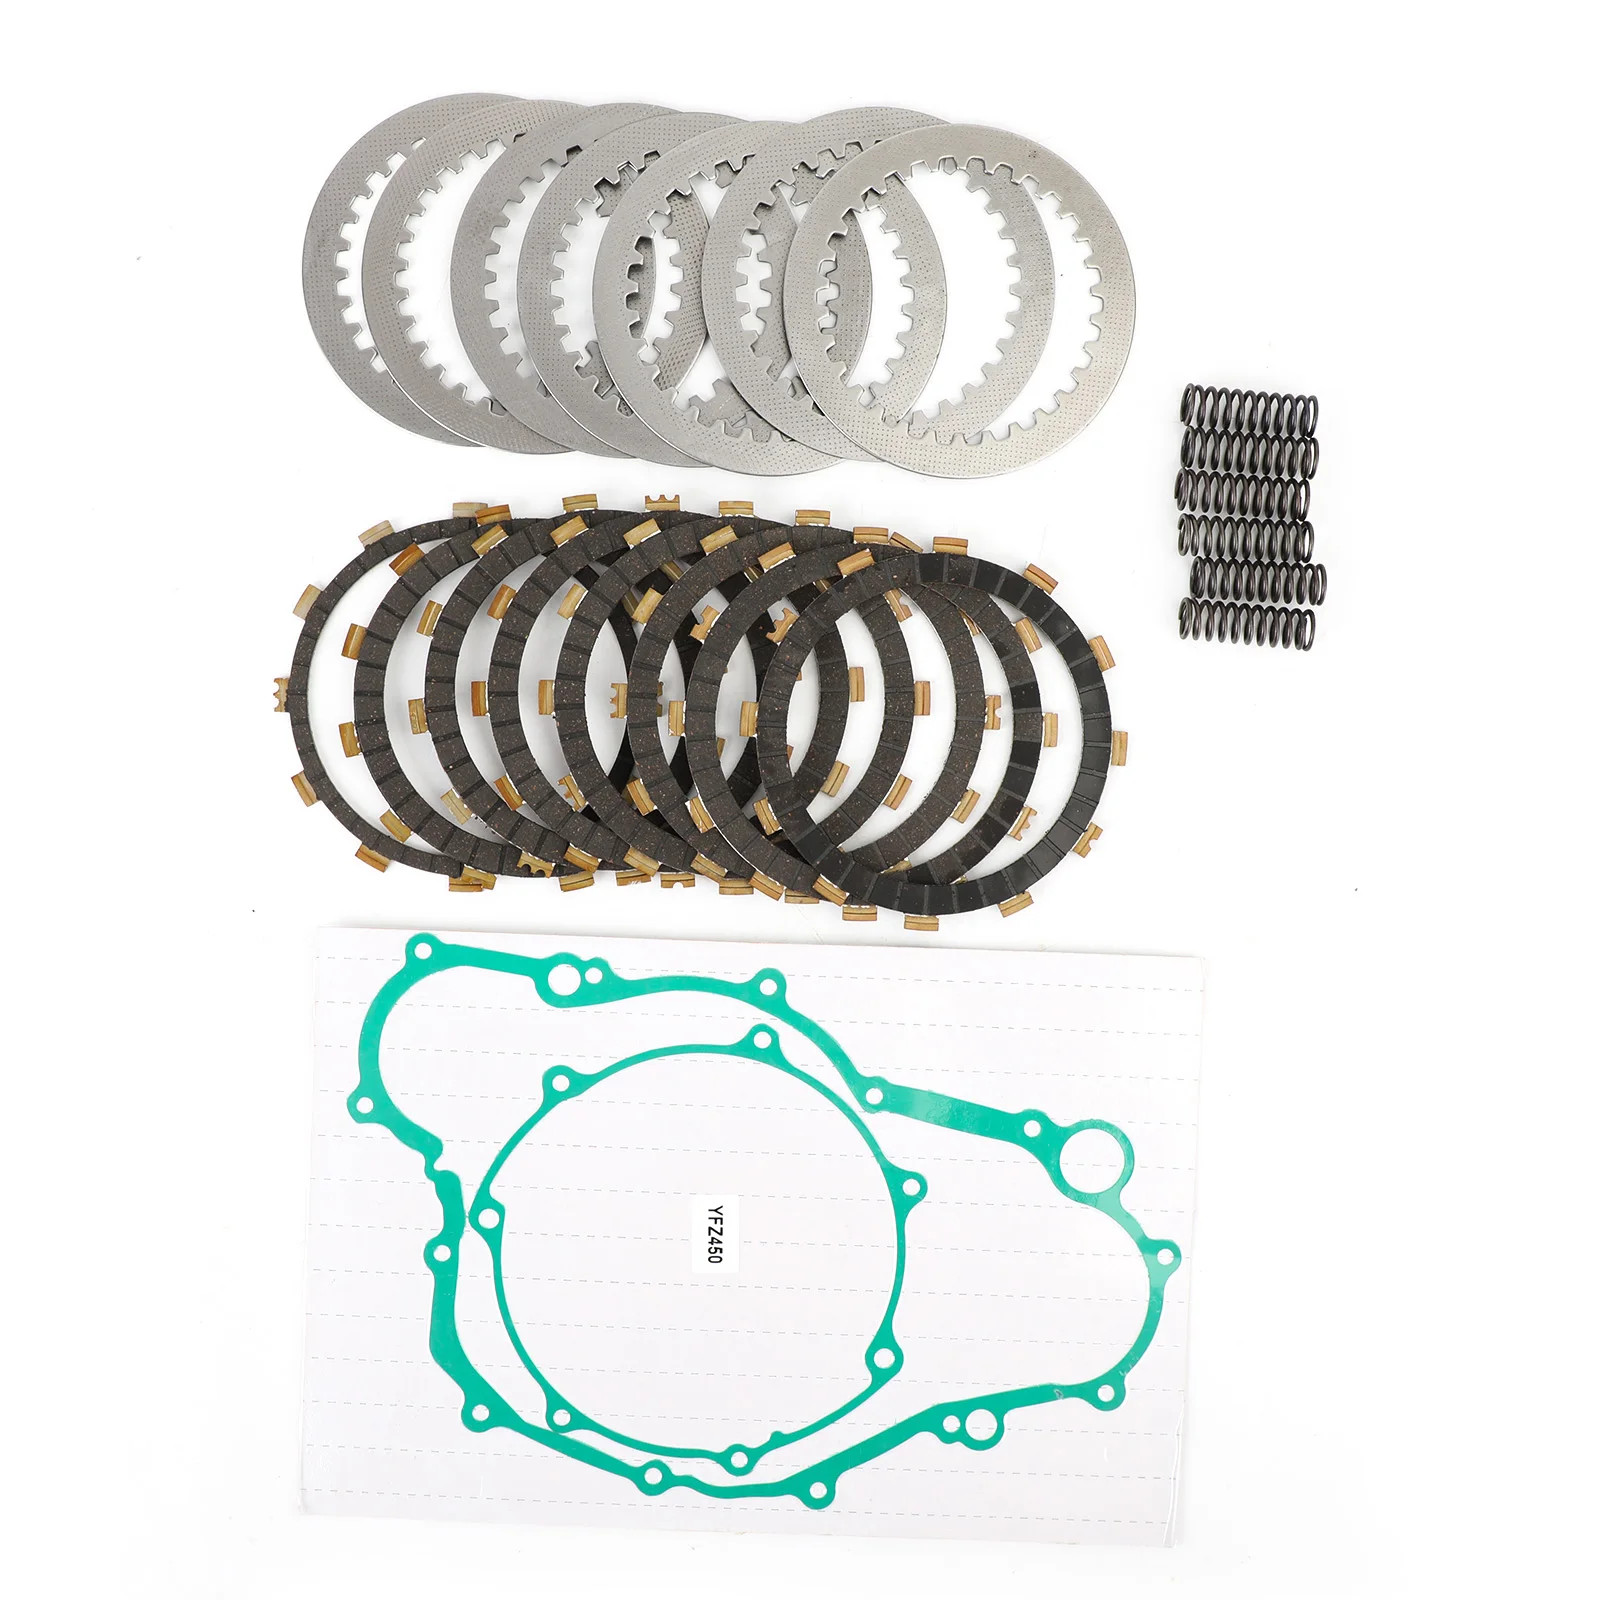 Artudatech for Yamaha YFZ450 YFZ 450 2004-2009 Clutch Friction Plates And Gasket Kit Motorcycle Accessories Parts